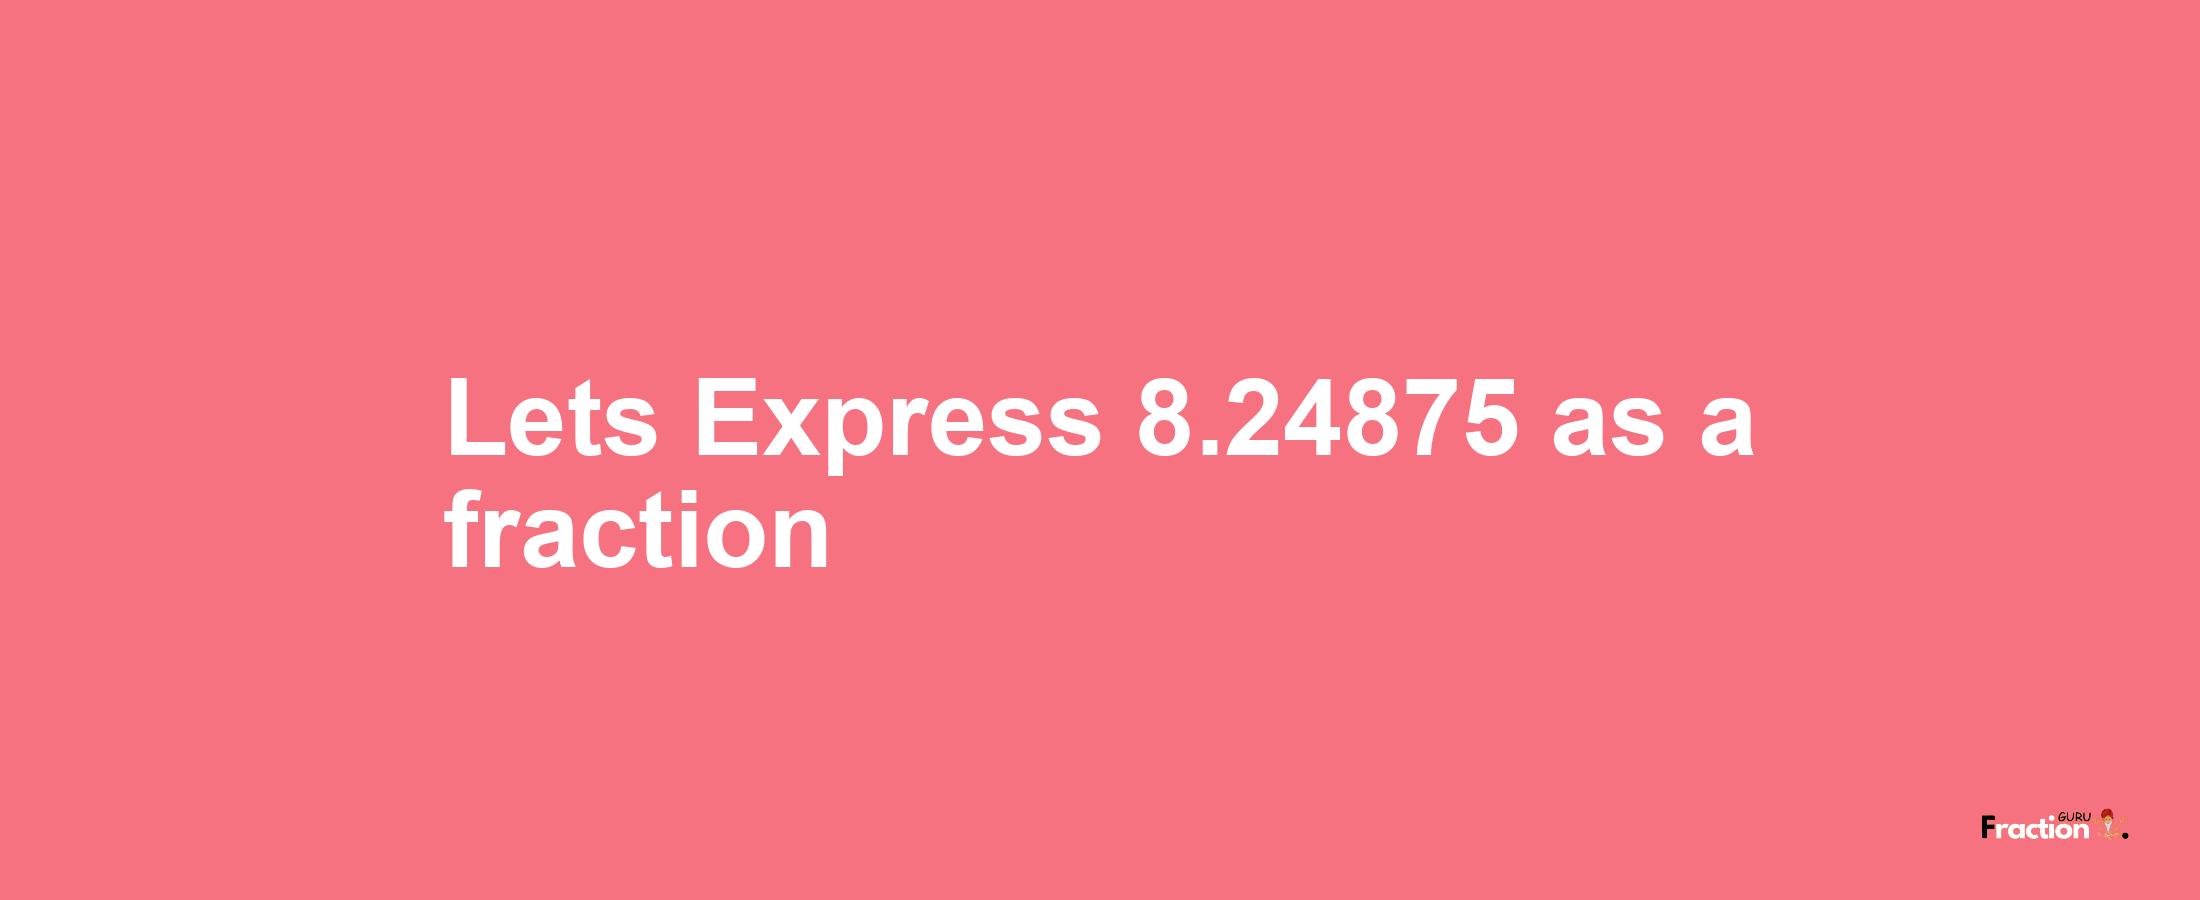 Lets Express 8.24875 as afraction